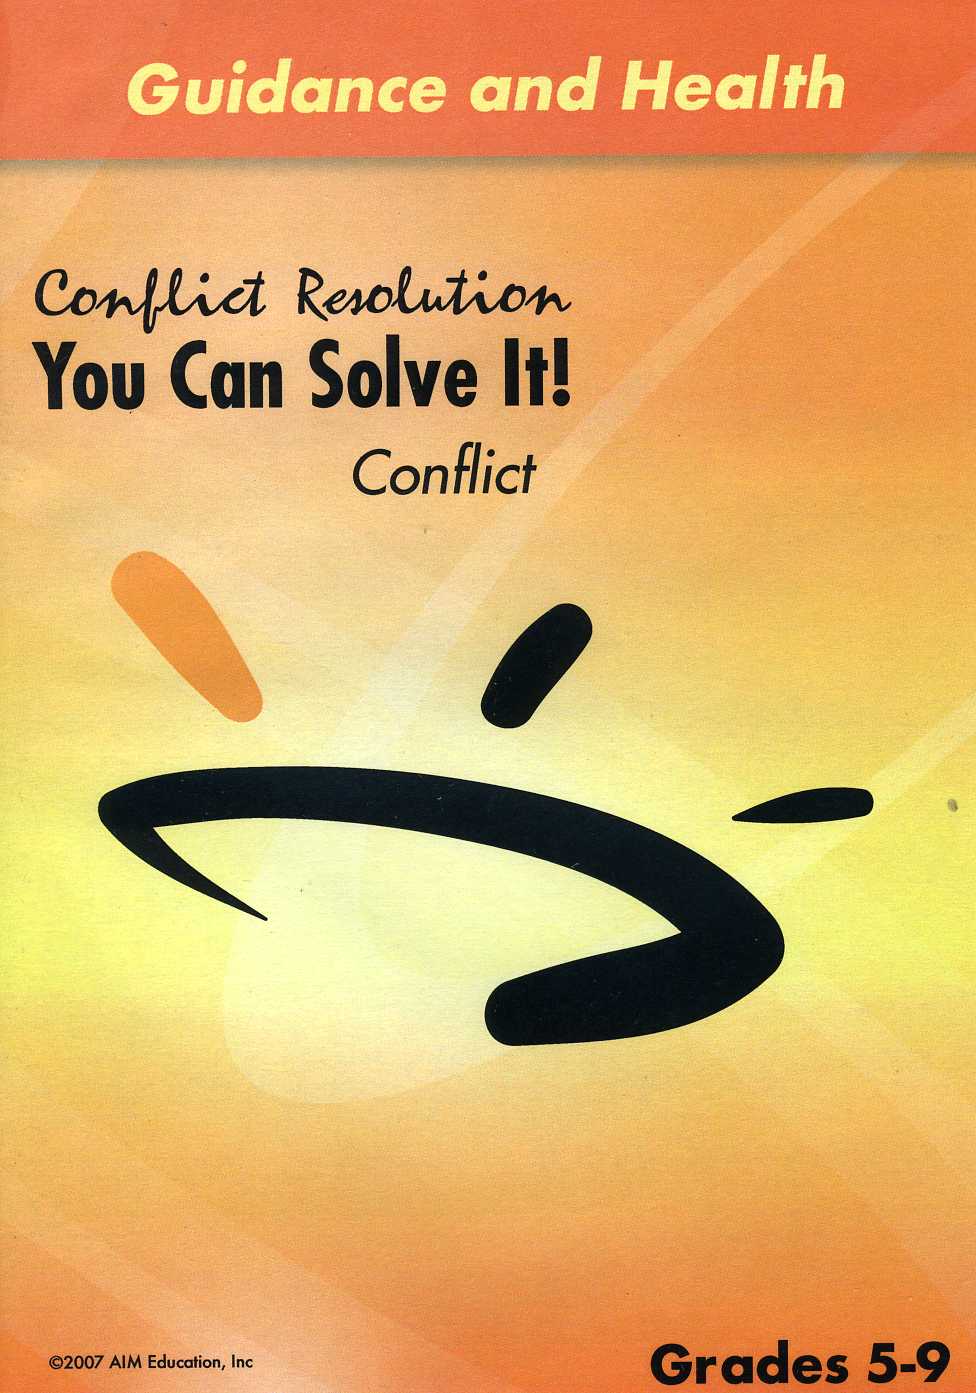 CONFLICT YOU CAN SOLVE IT